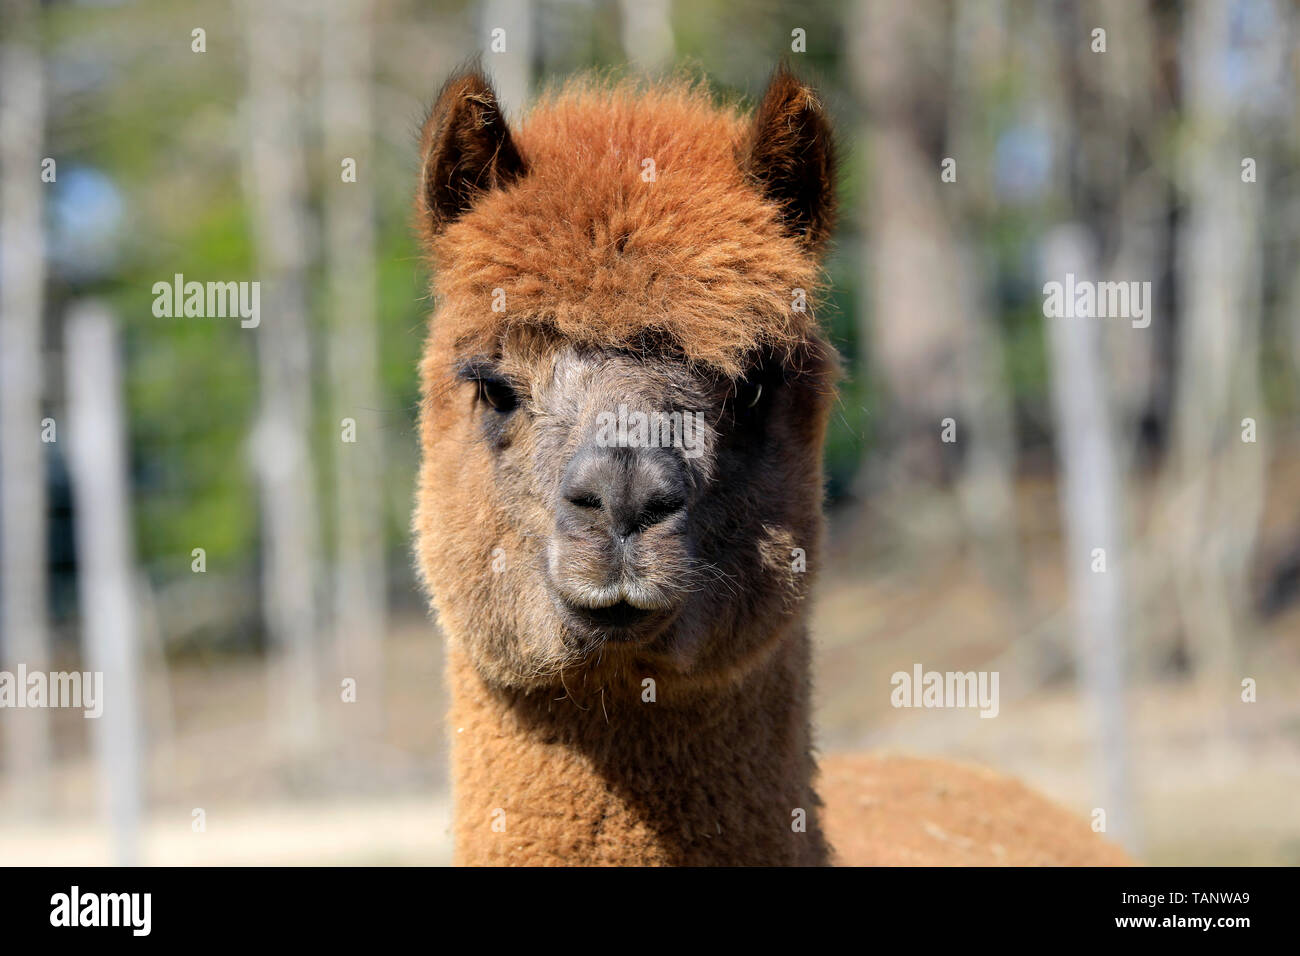 Close-up portrait of a brown domesticated alpaca, Vicugna pacos, looking in the camera. Stock Photo